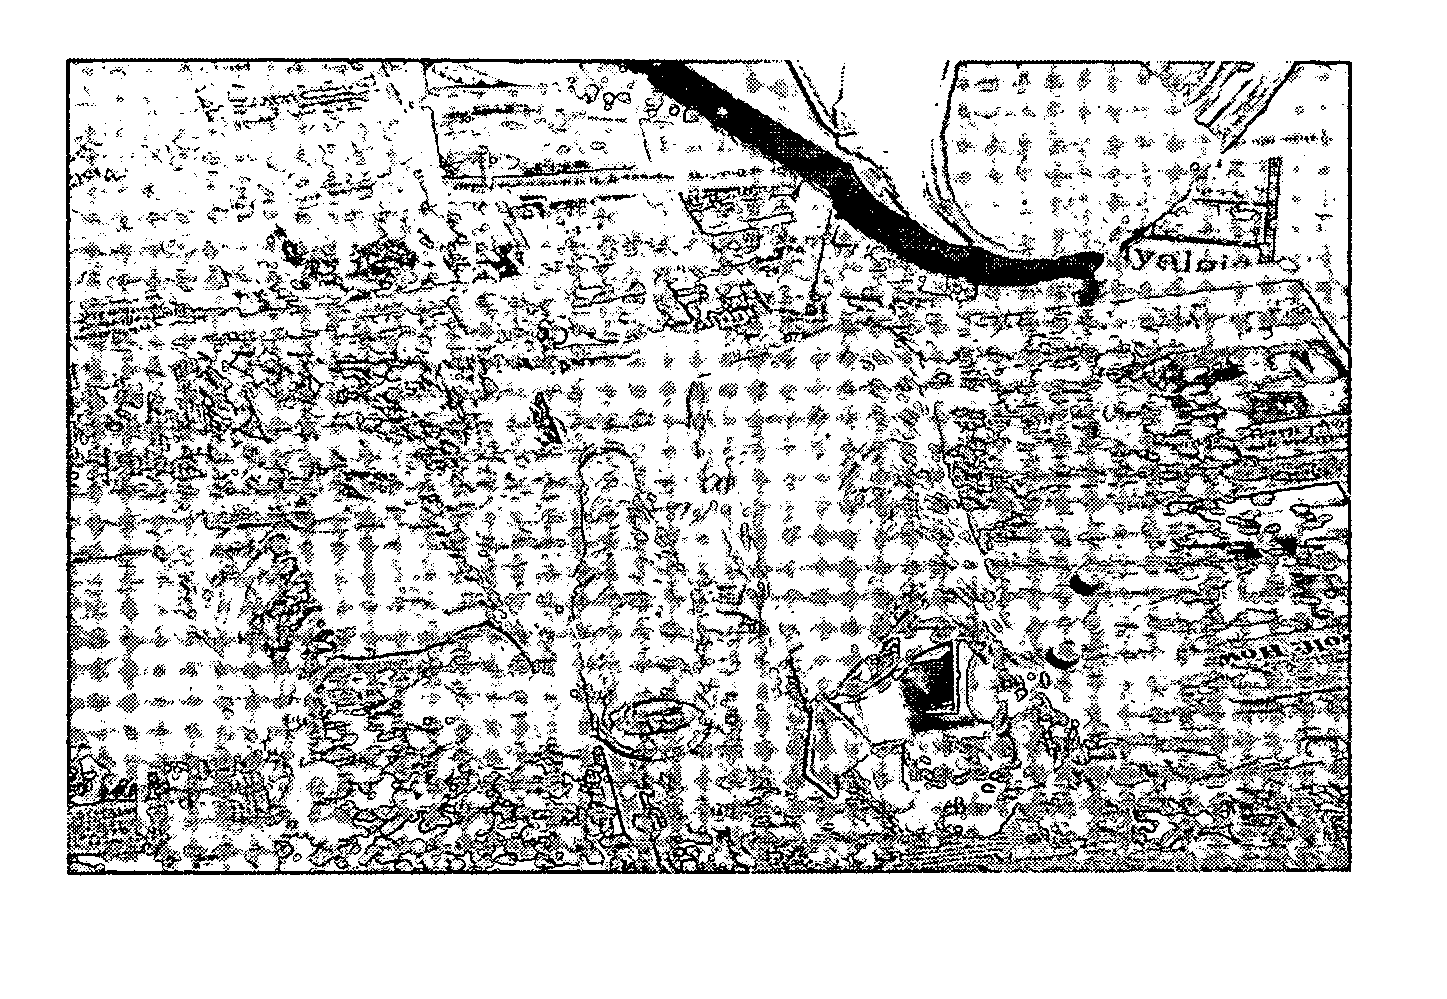 Composition and method for forming a sprayable materials cover